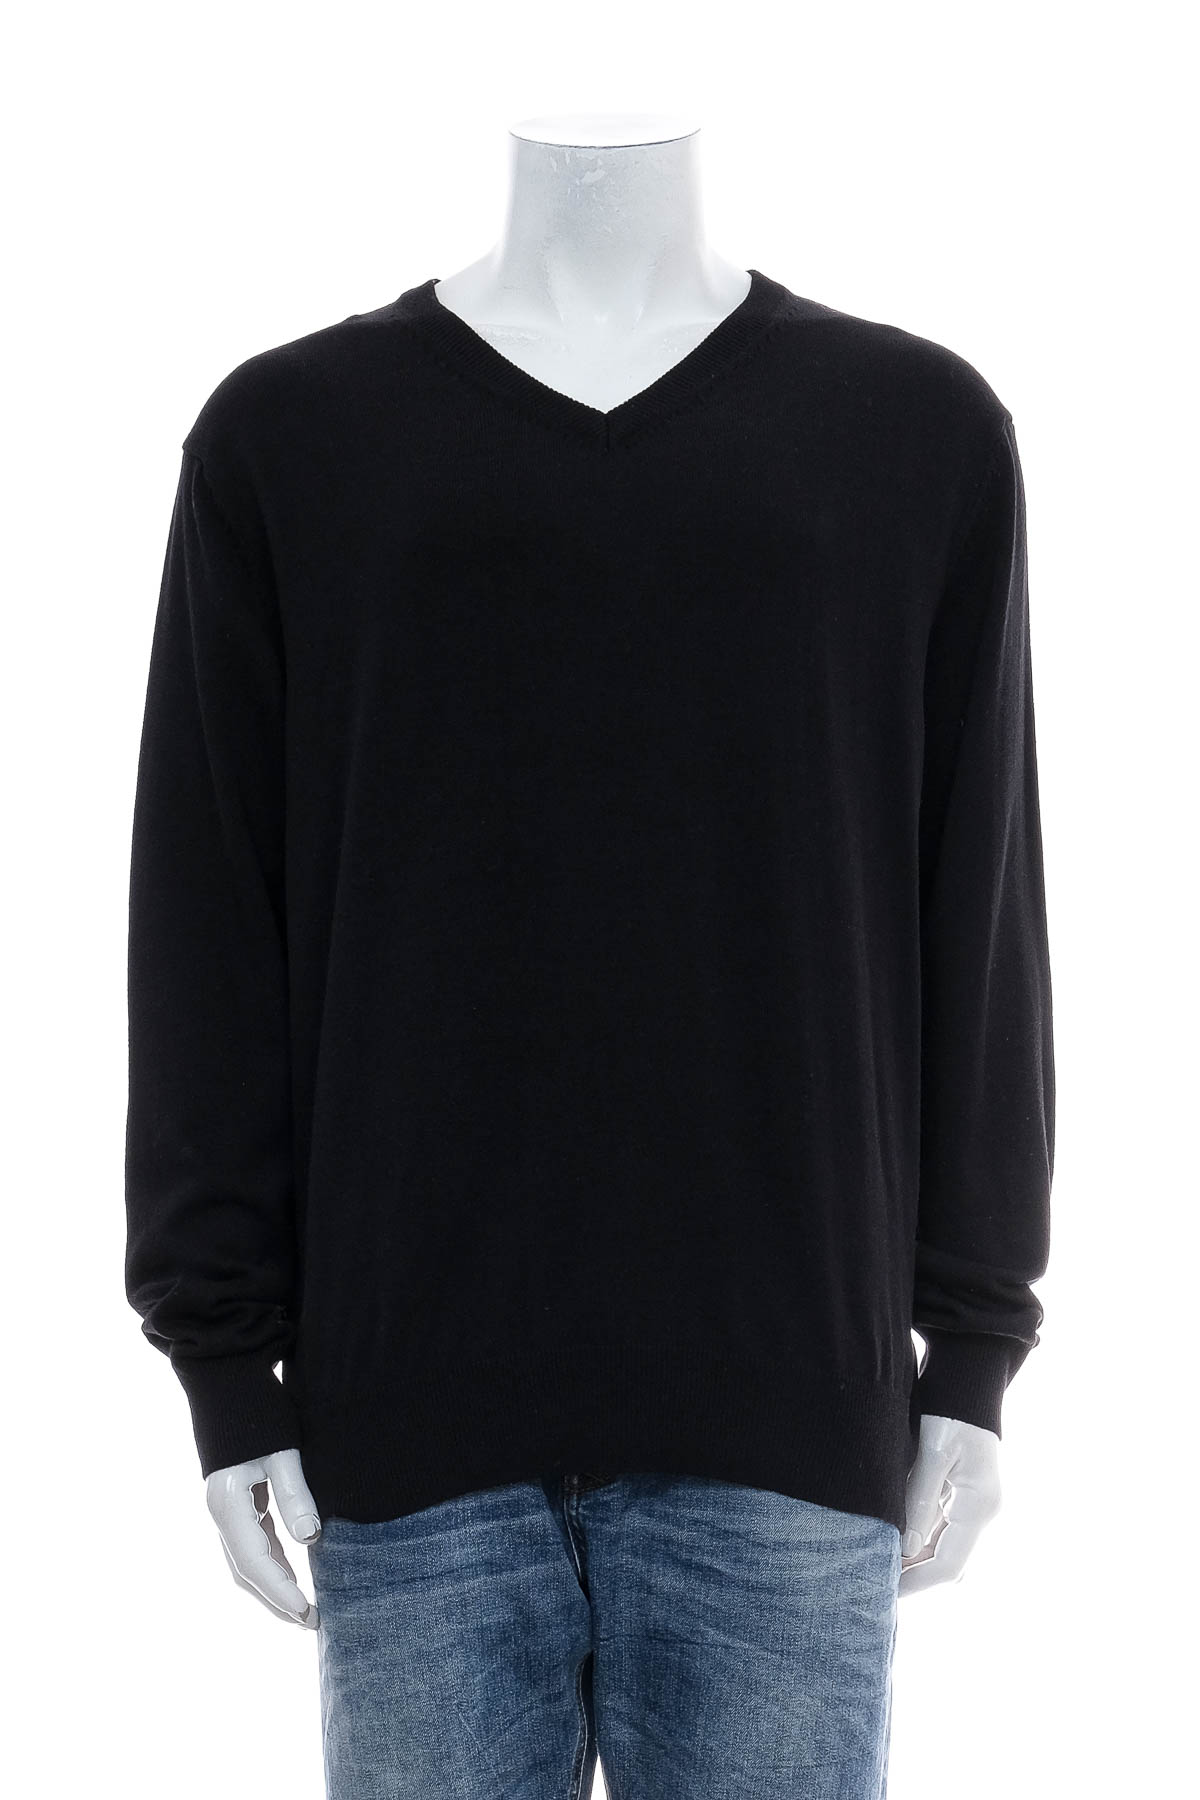 Men's sweater - Luciano - 0